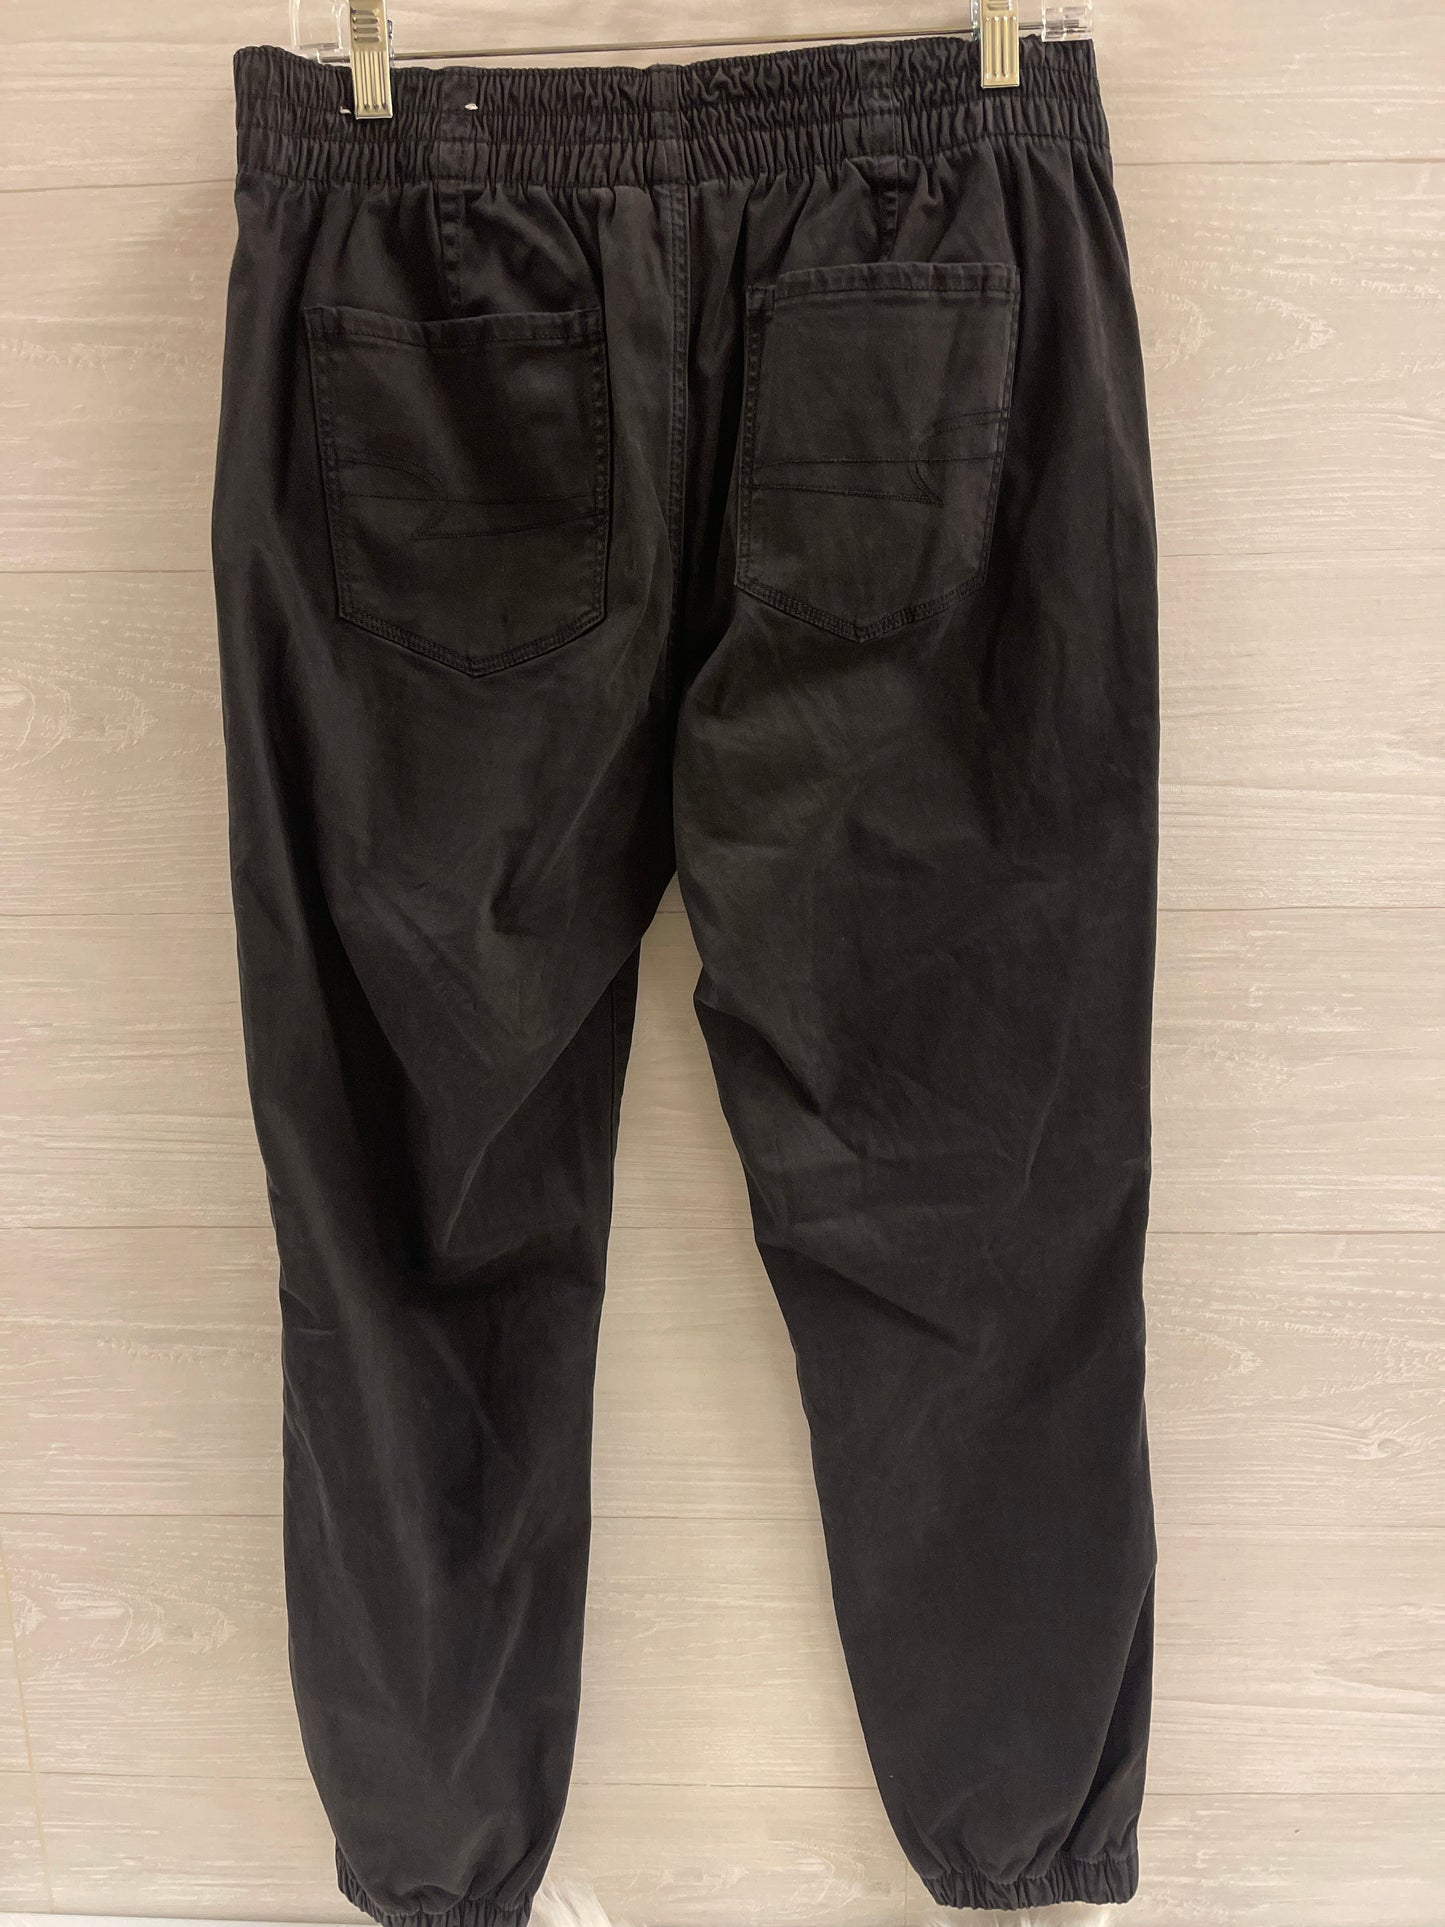 Pants Cargo & Utility By American Eagle  Size: 14